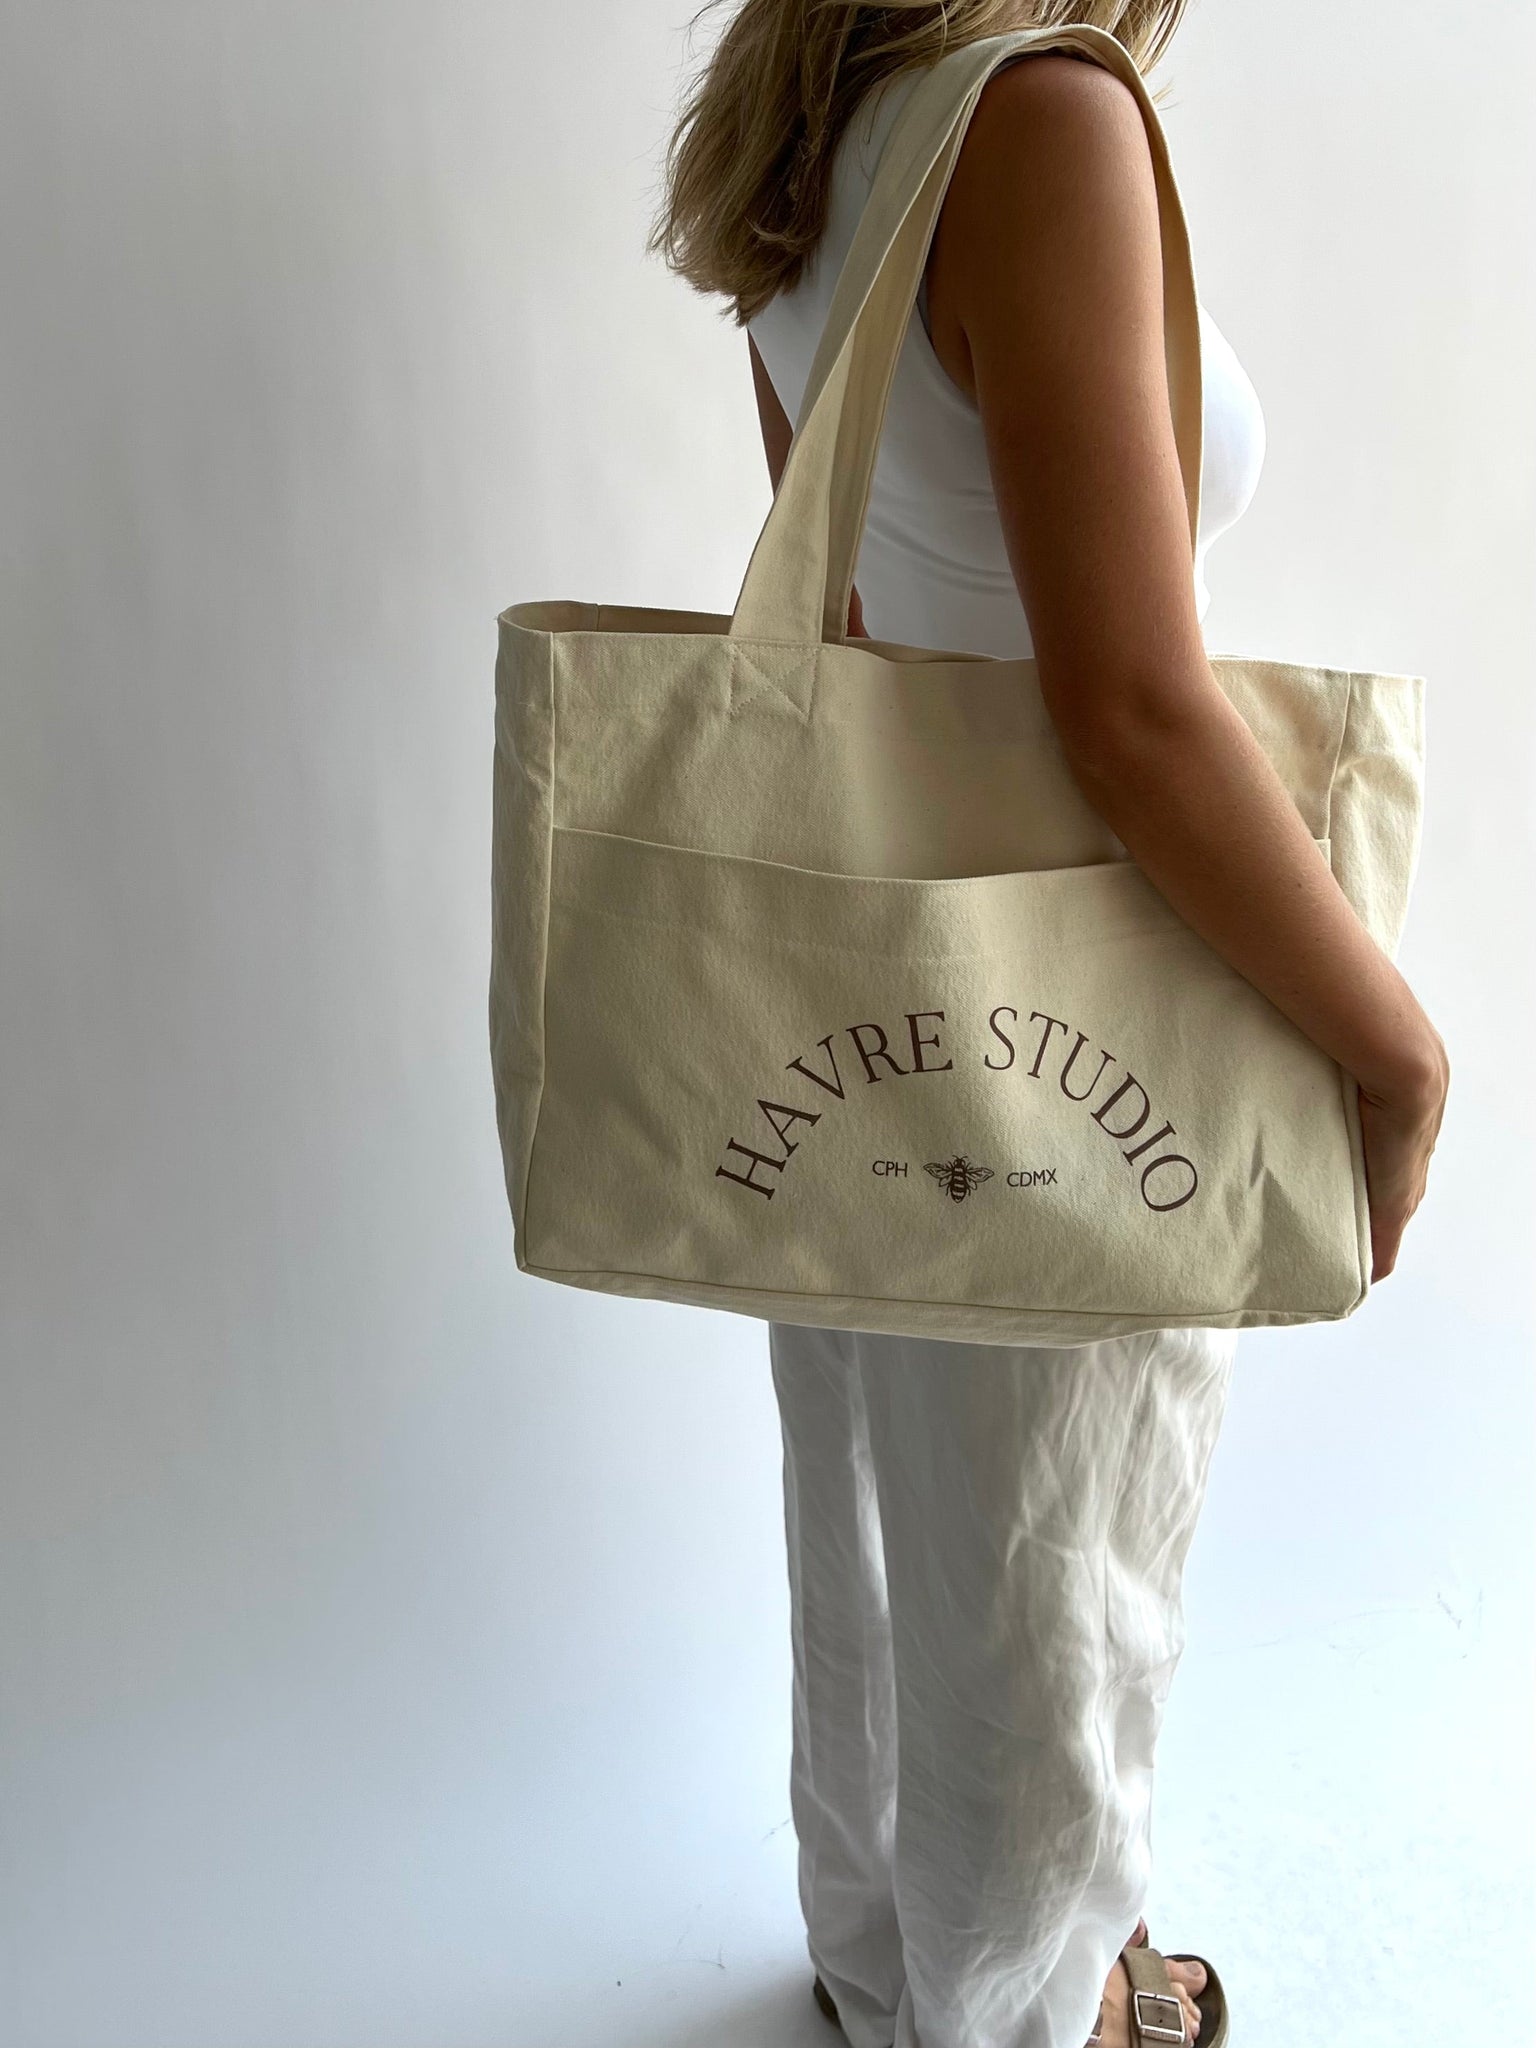 Havre Studio Tote in chocolate brown with 5 pockets/spaces